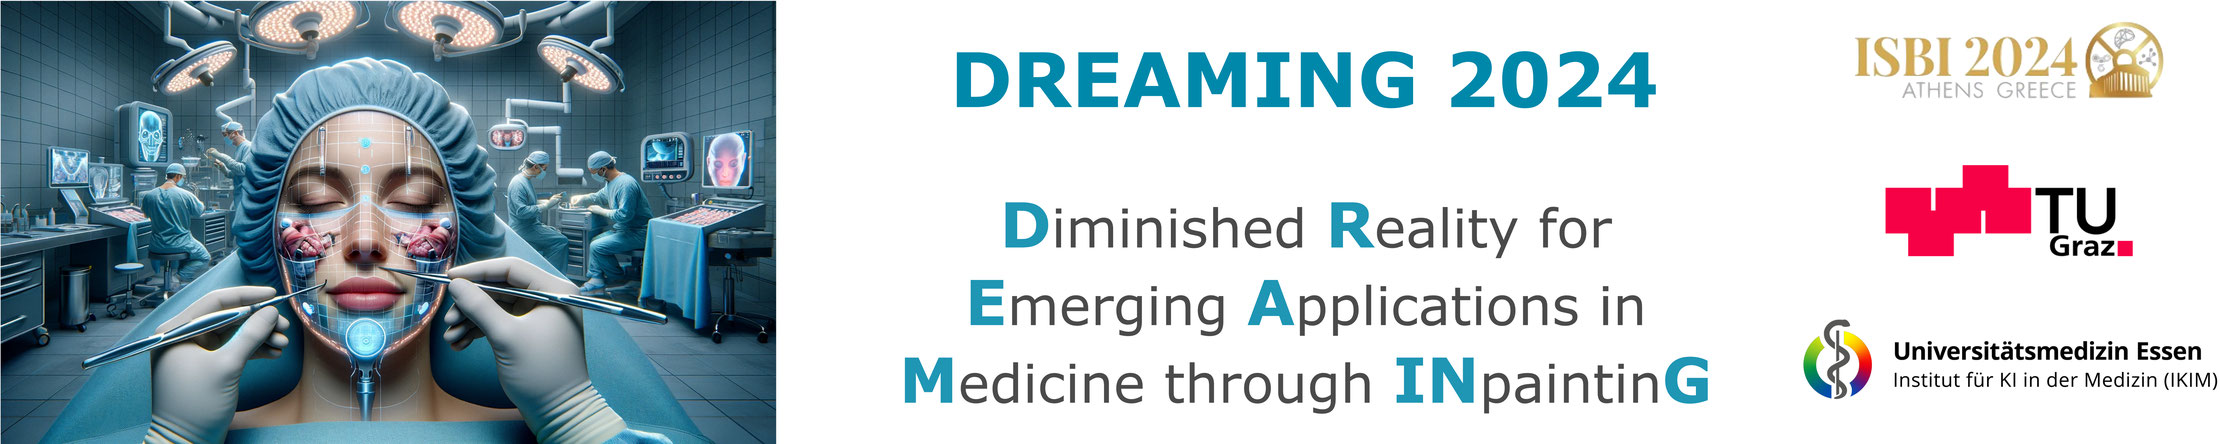 Diminished Reality for Emerging Applications in Medicine Banner